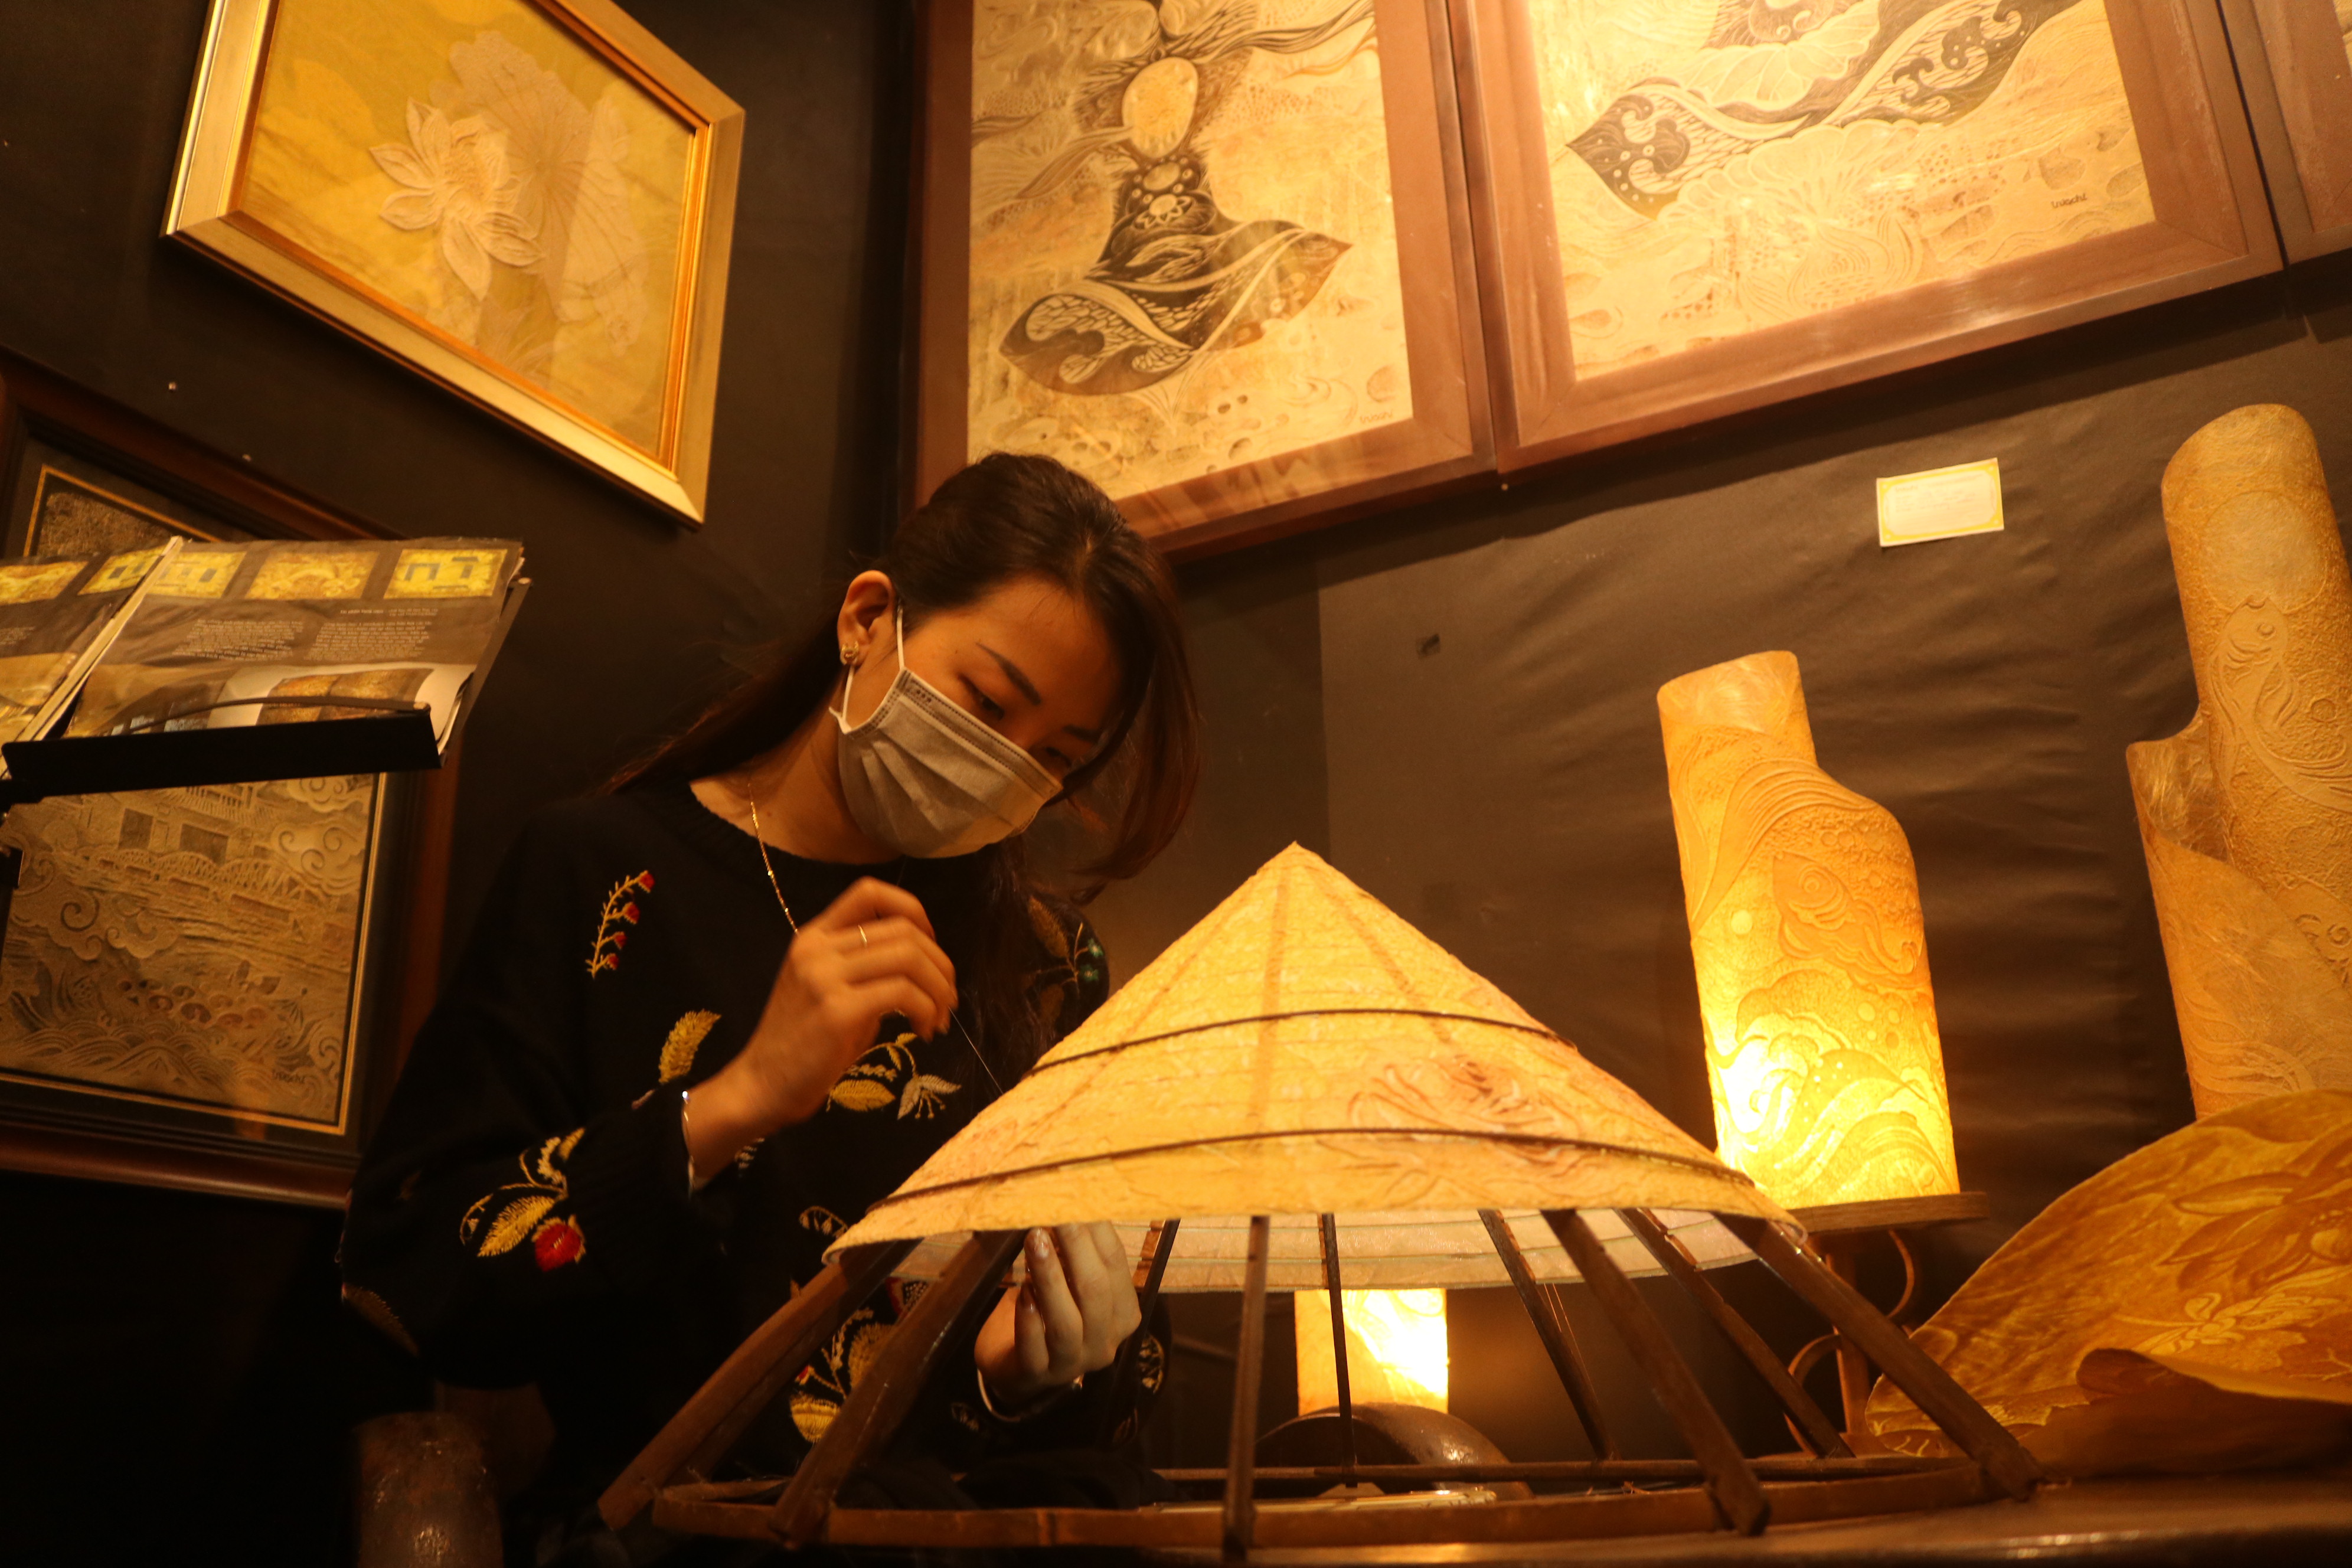 Artist Nguyen Thi Thuy Dung works on a trucchigraphic non la (Vietnamese conical hat) at Truc Chi Garden in Hue. Photo: Hoang An / Tuoi Tre News